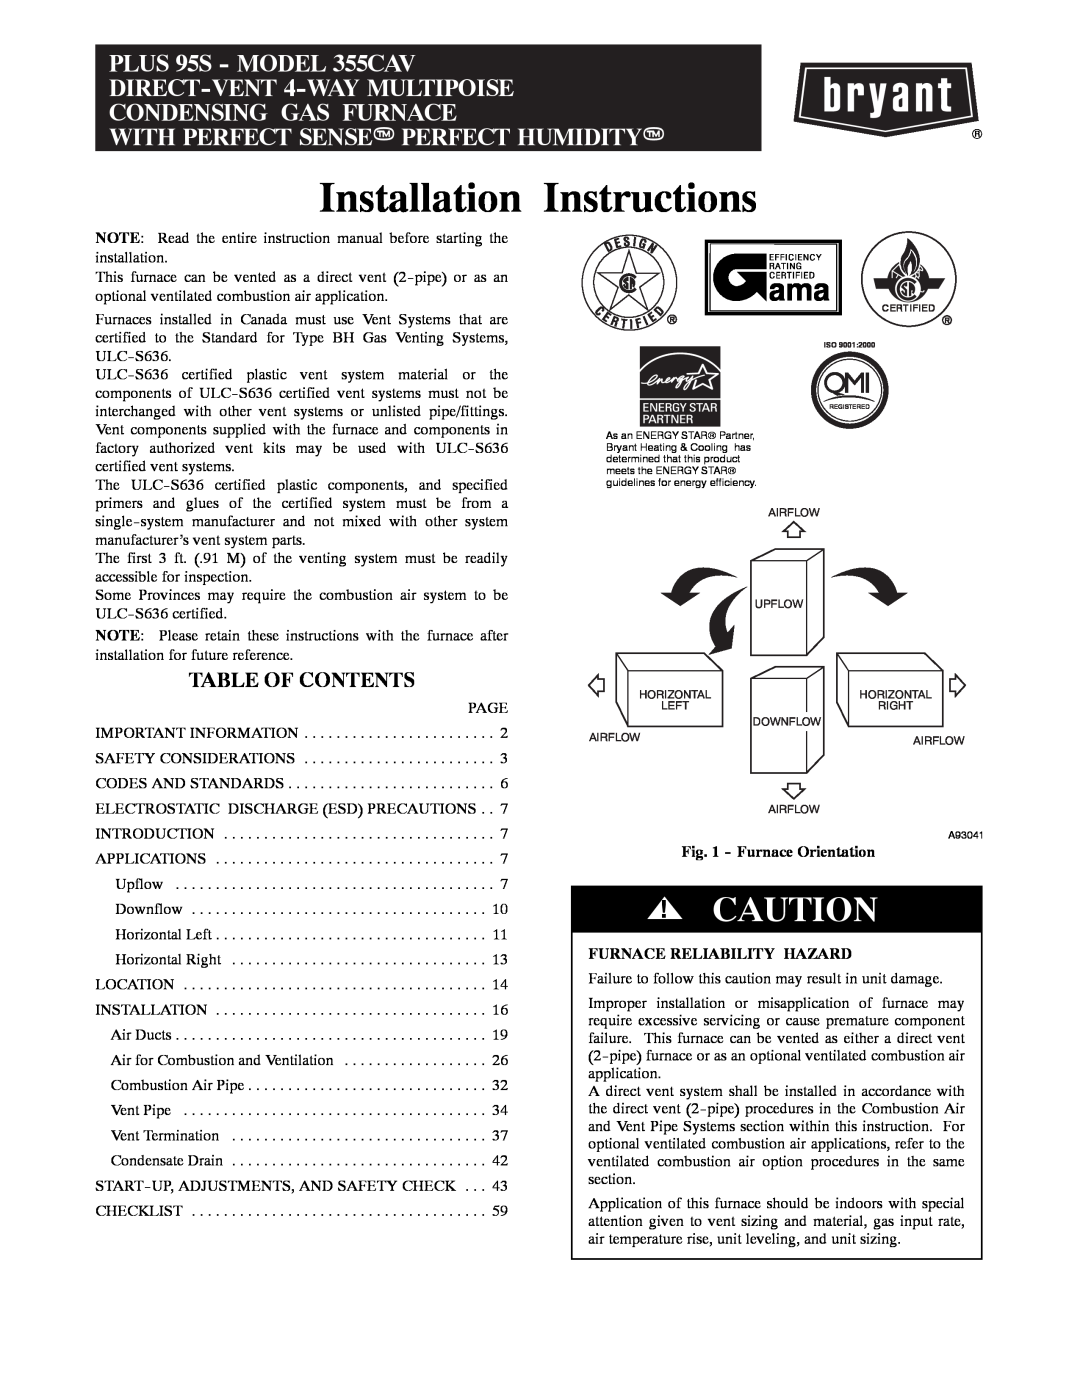 Bryant 355CAV installation instructions Table Of Contents, Furnace Orientation, Furnace Reliability Hazard 